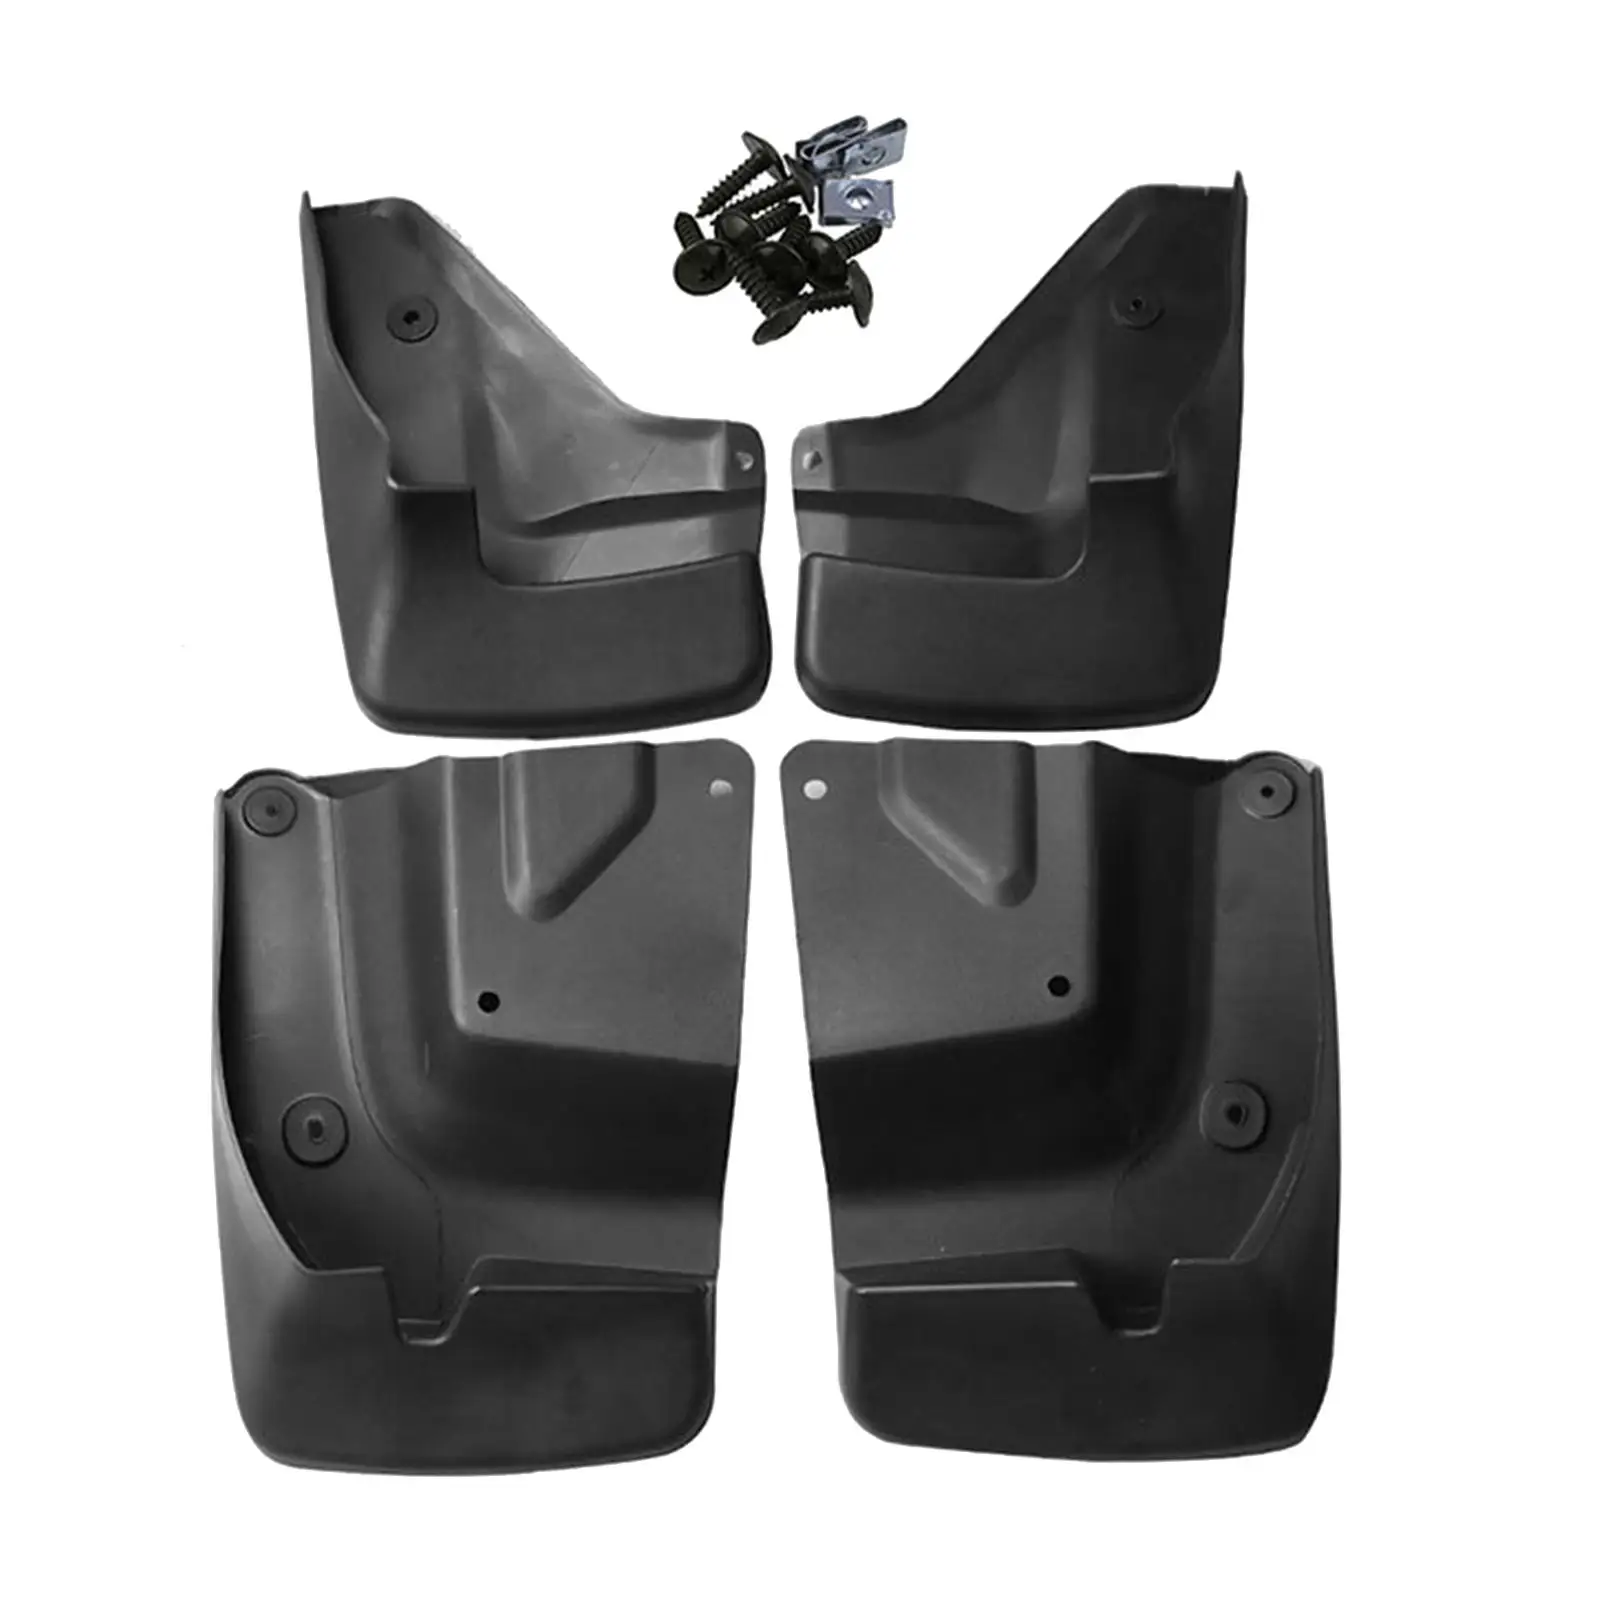 Black Car Mud Flaps 4 Pieces Mud Guards Car Styling Mudguards Durable